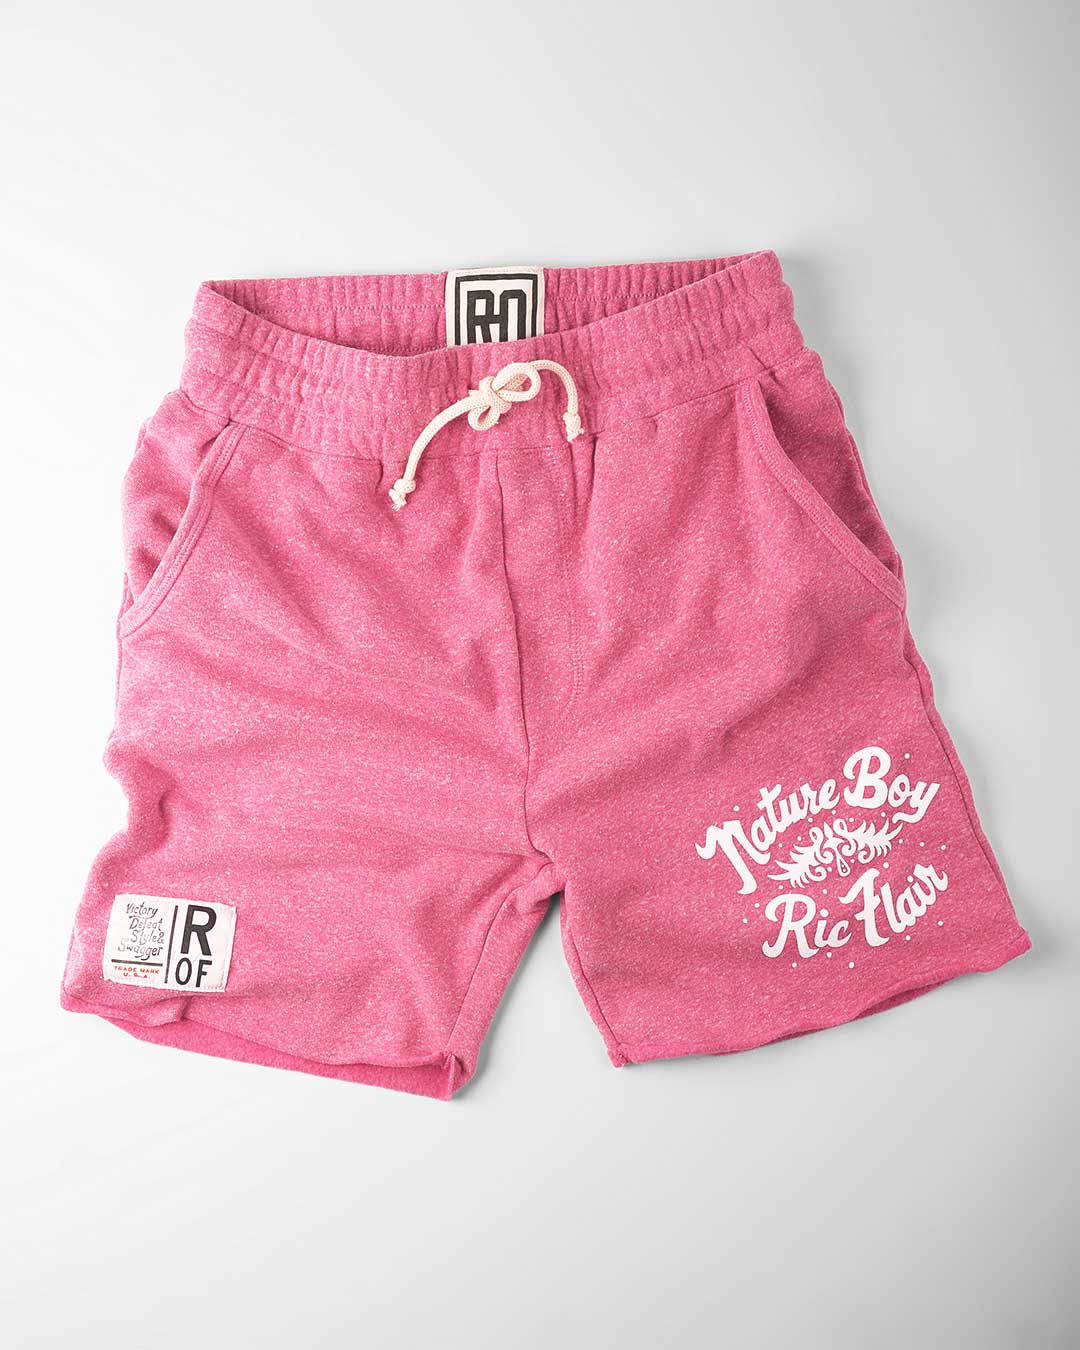 Ric Flair Nature Boy Pink Shorts - Roots of Fight Canada